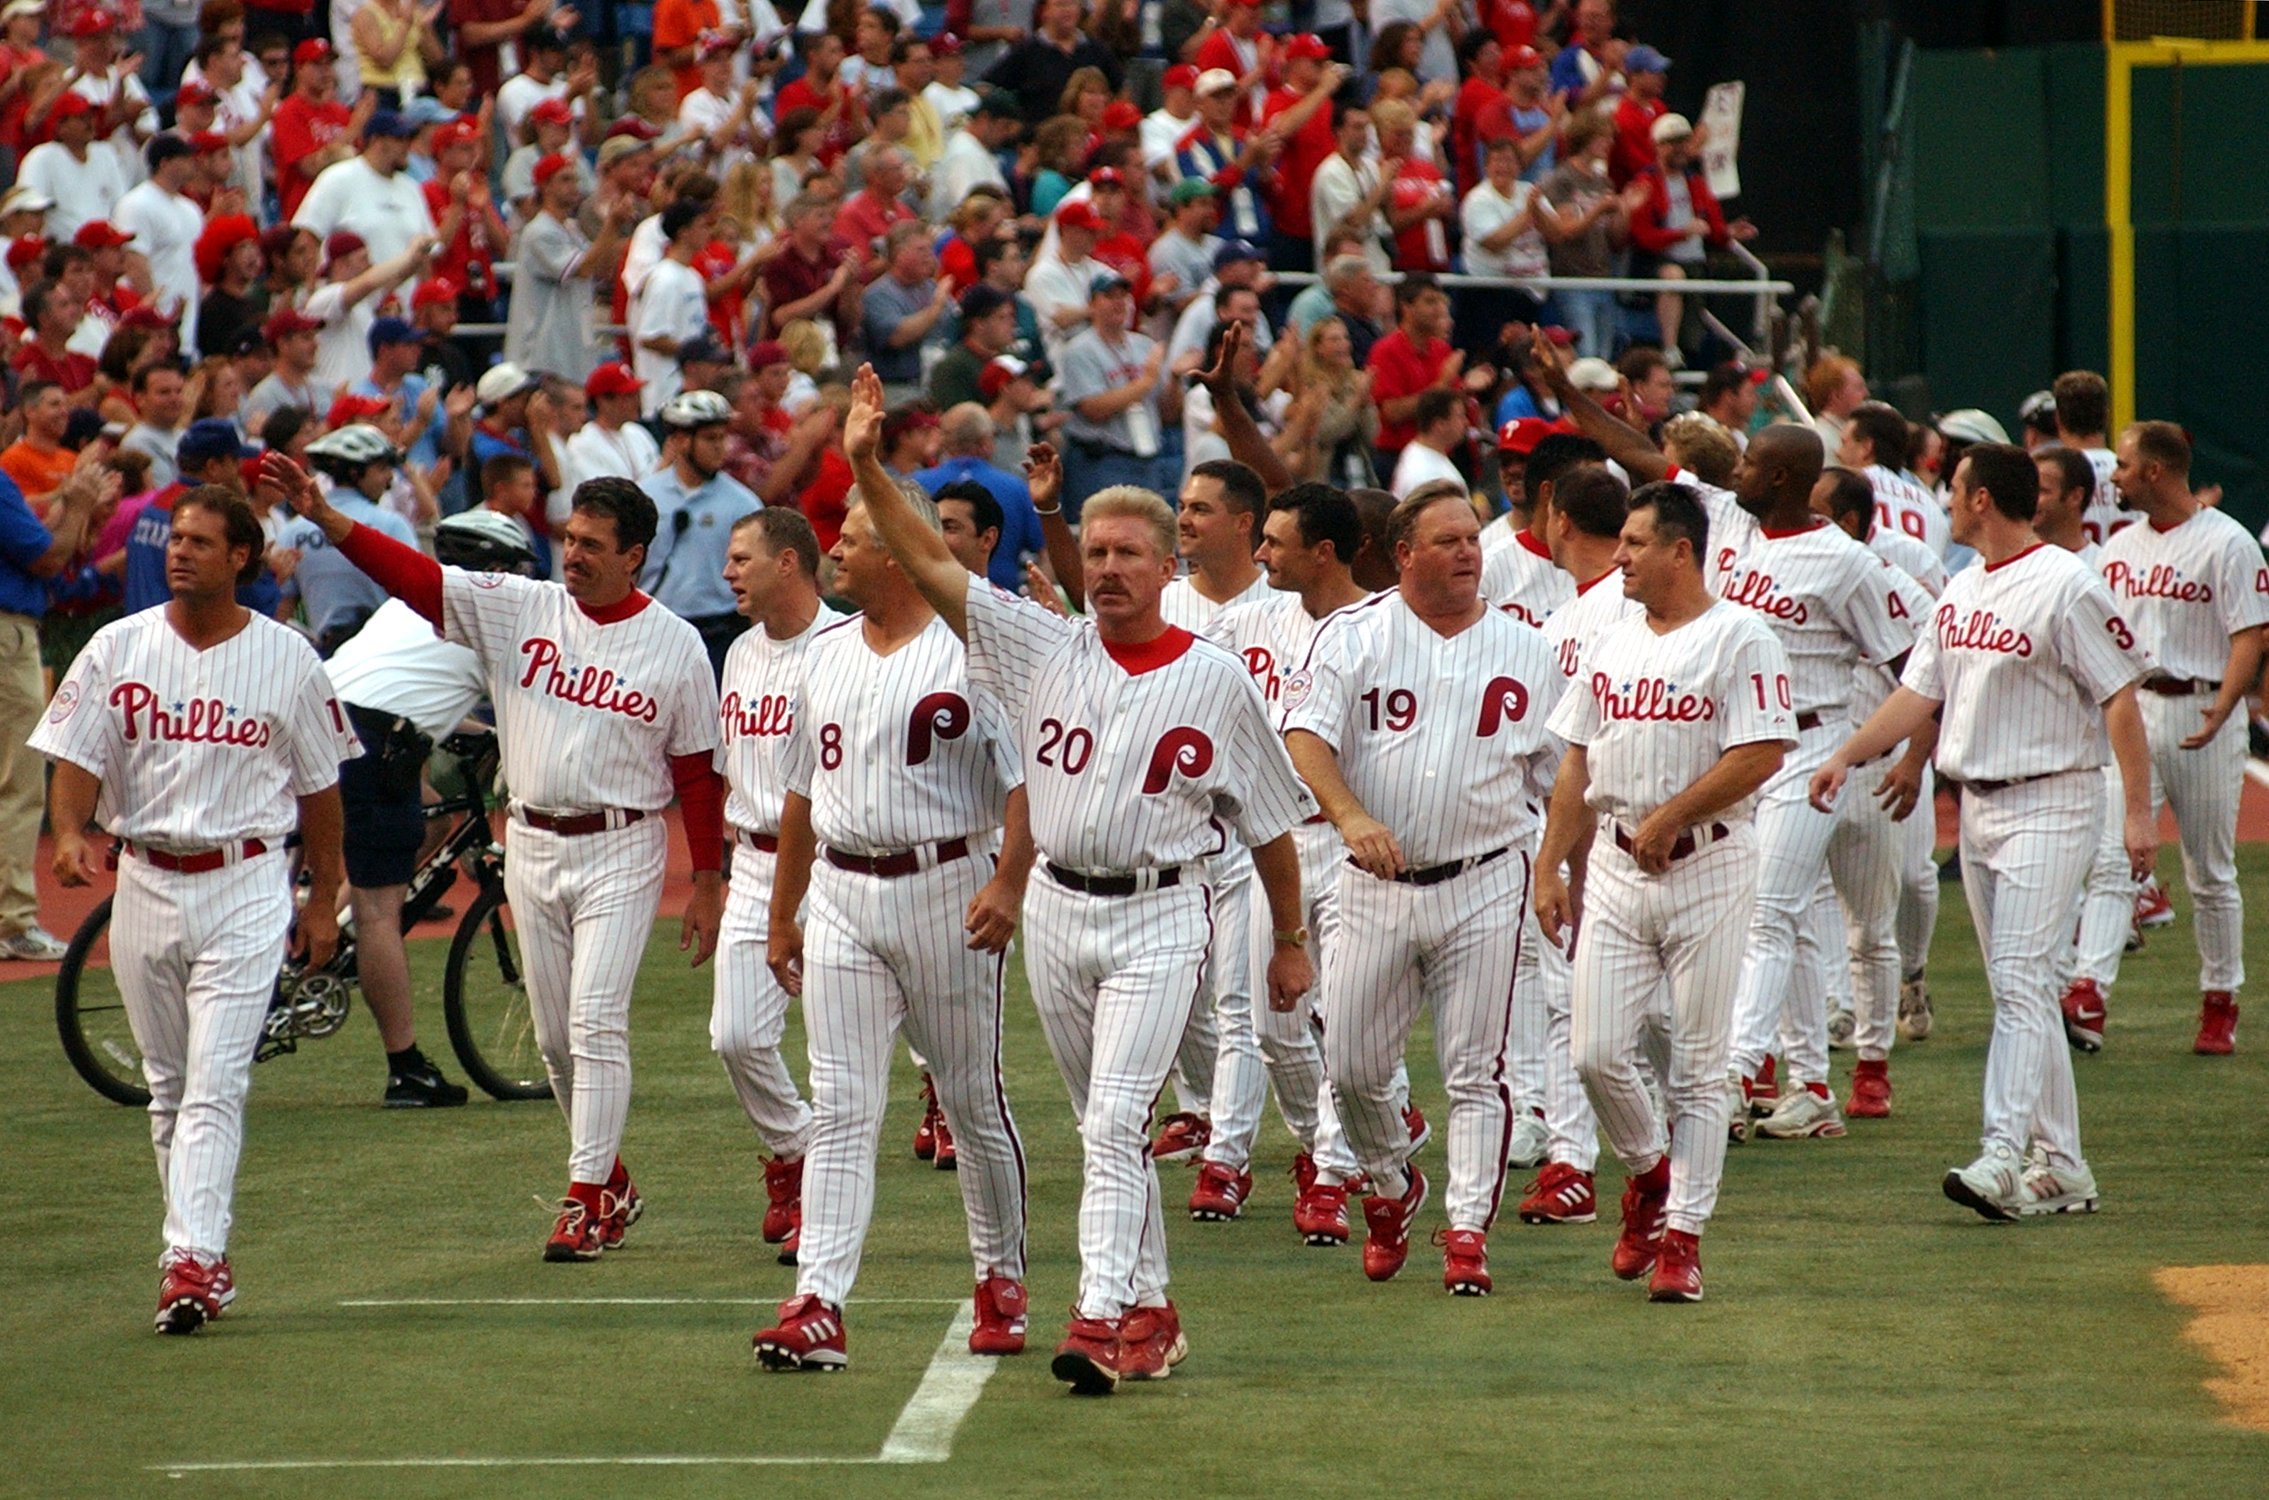 Reliving a Great Weekend For The Eagles and Phillies